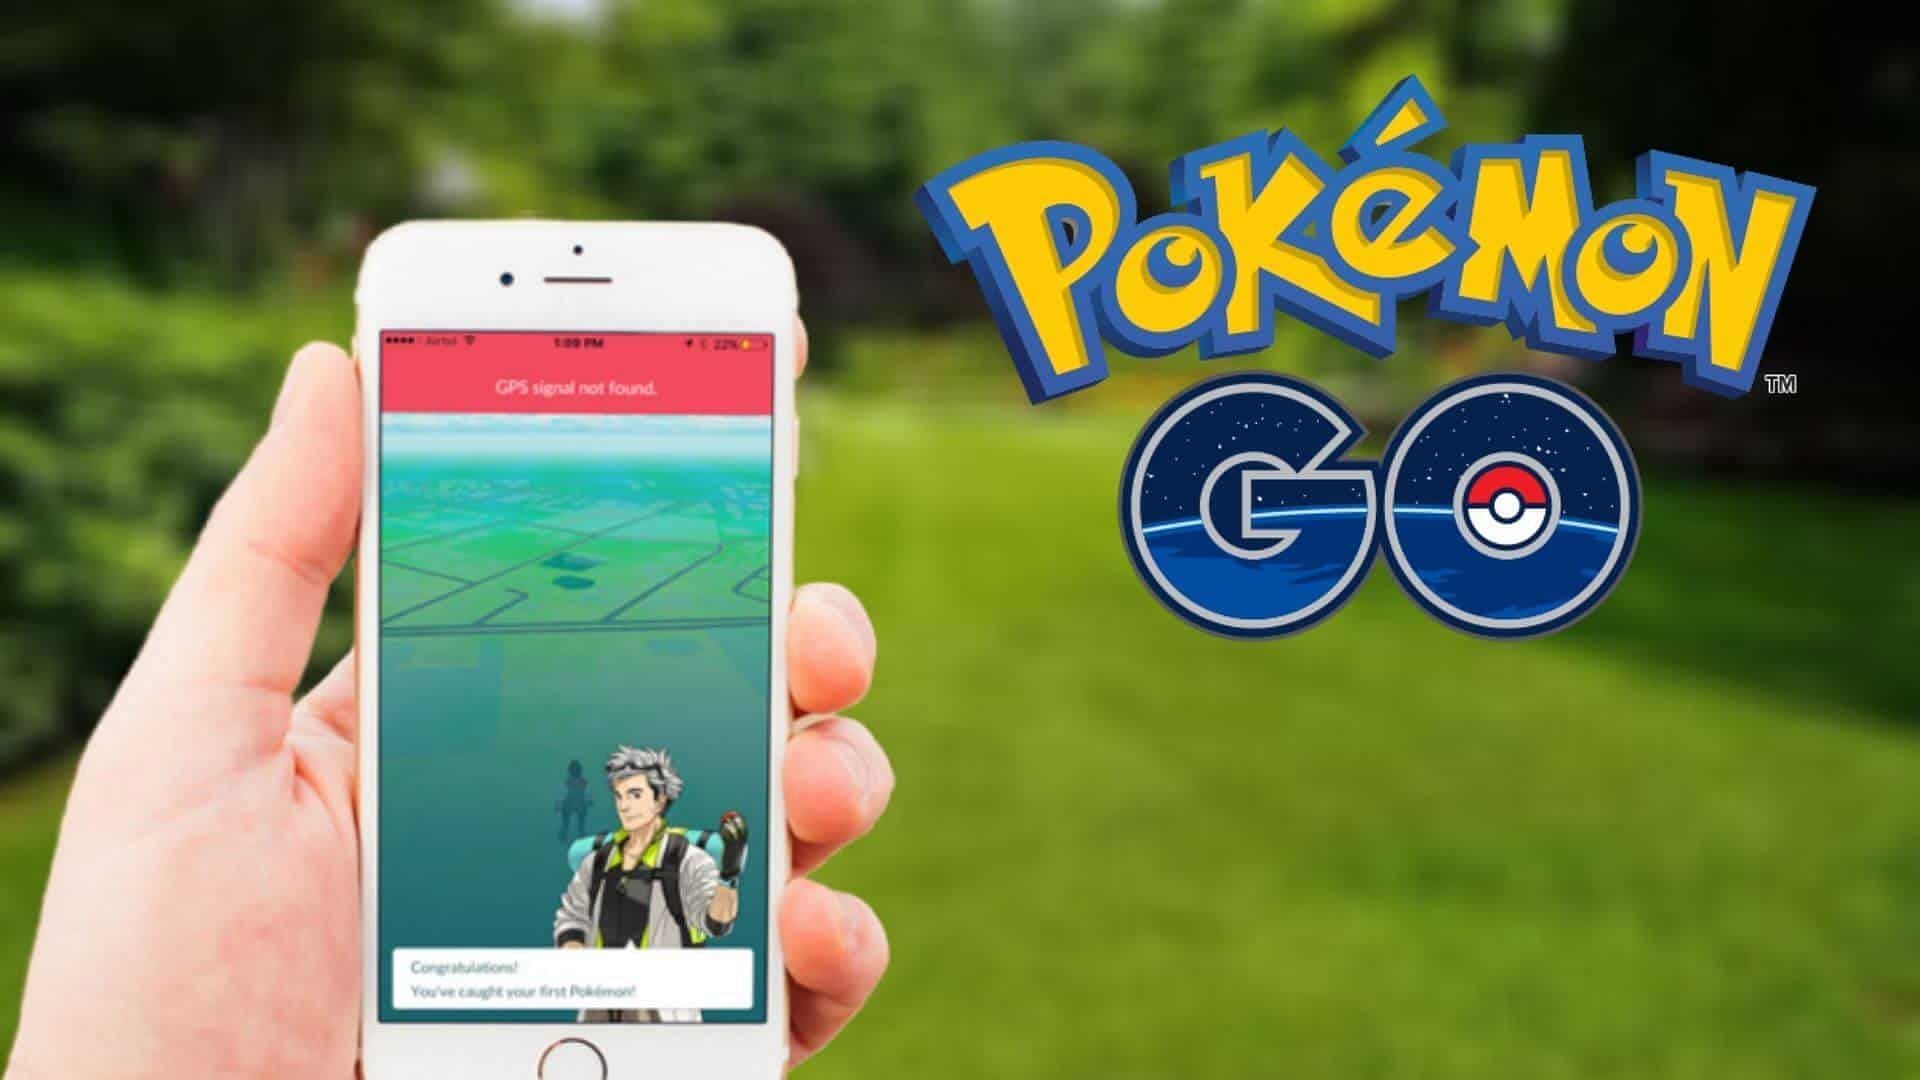 Pokemon GO "GPS signal found" error: How to fix, possible reasons, and more